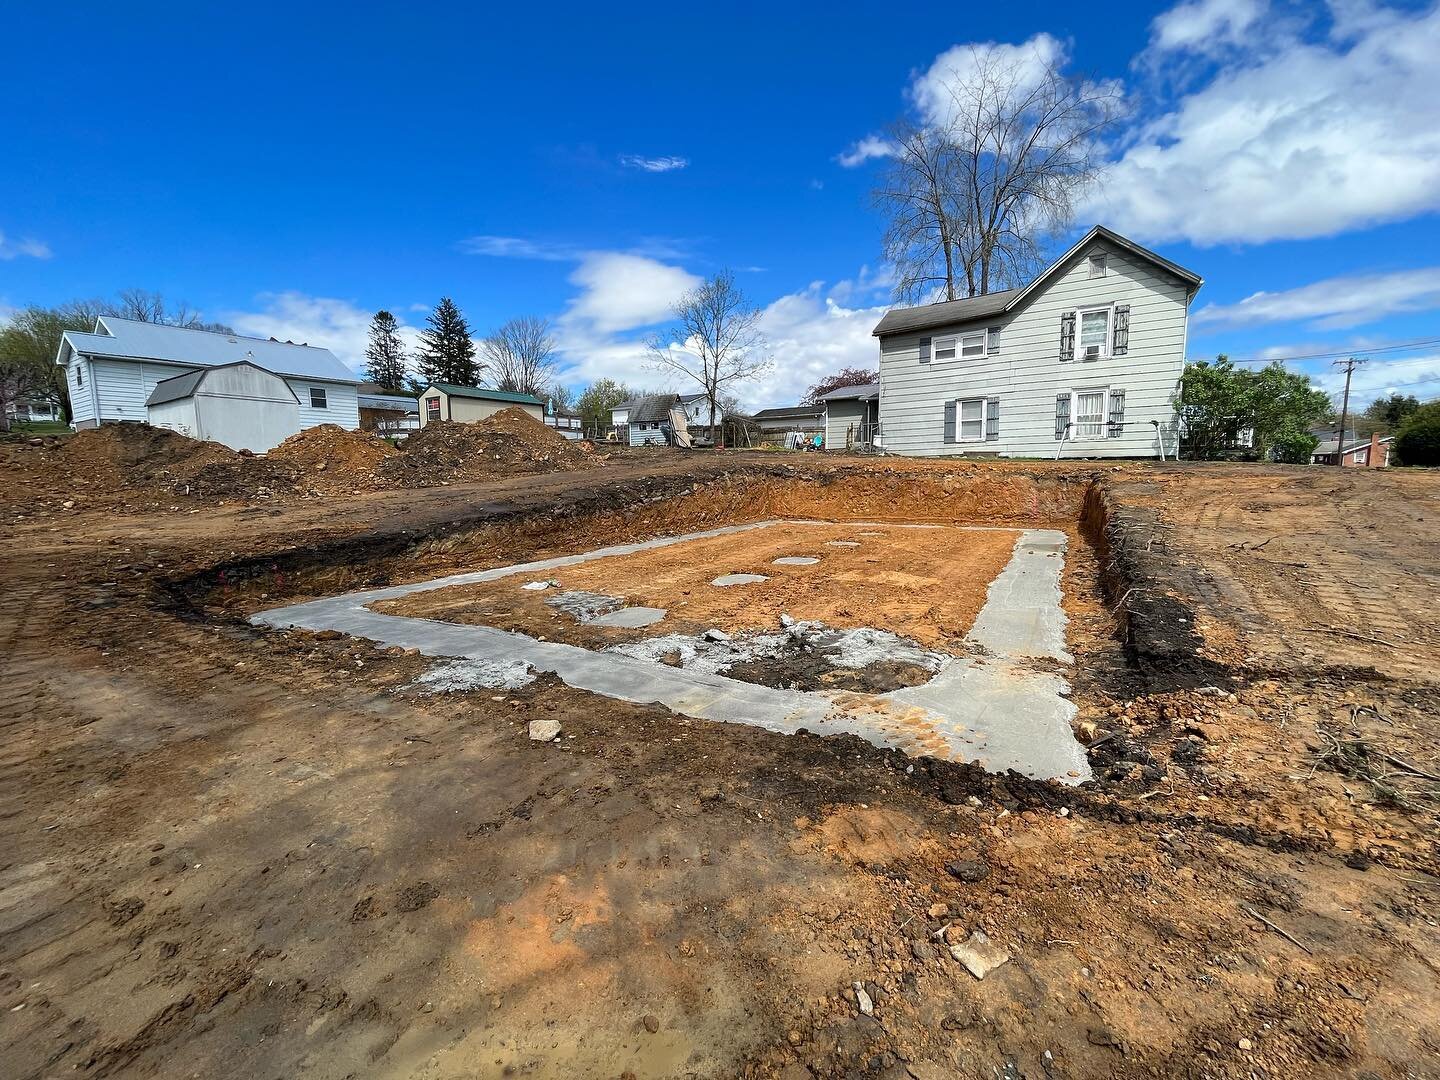 so much progress in a week! we&rsquo;re gearing up for a beautiful build season in #roncevertewv ☀️🏡
&bull;
&bull;
&bull;
#almostheavenhabitat #almostheavenhabitatforhumanity #almostheaven #almostheavenwv #newhomeconstruction #buildinghomes #buildin